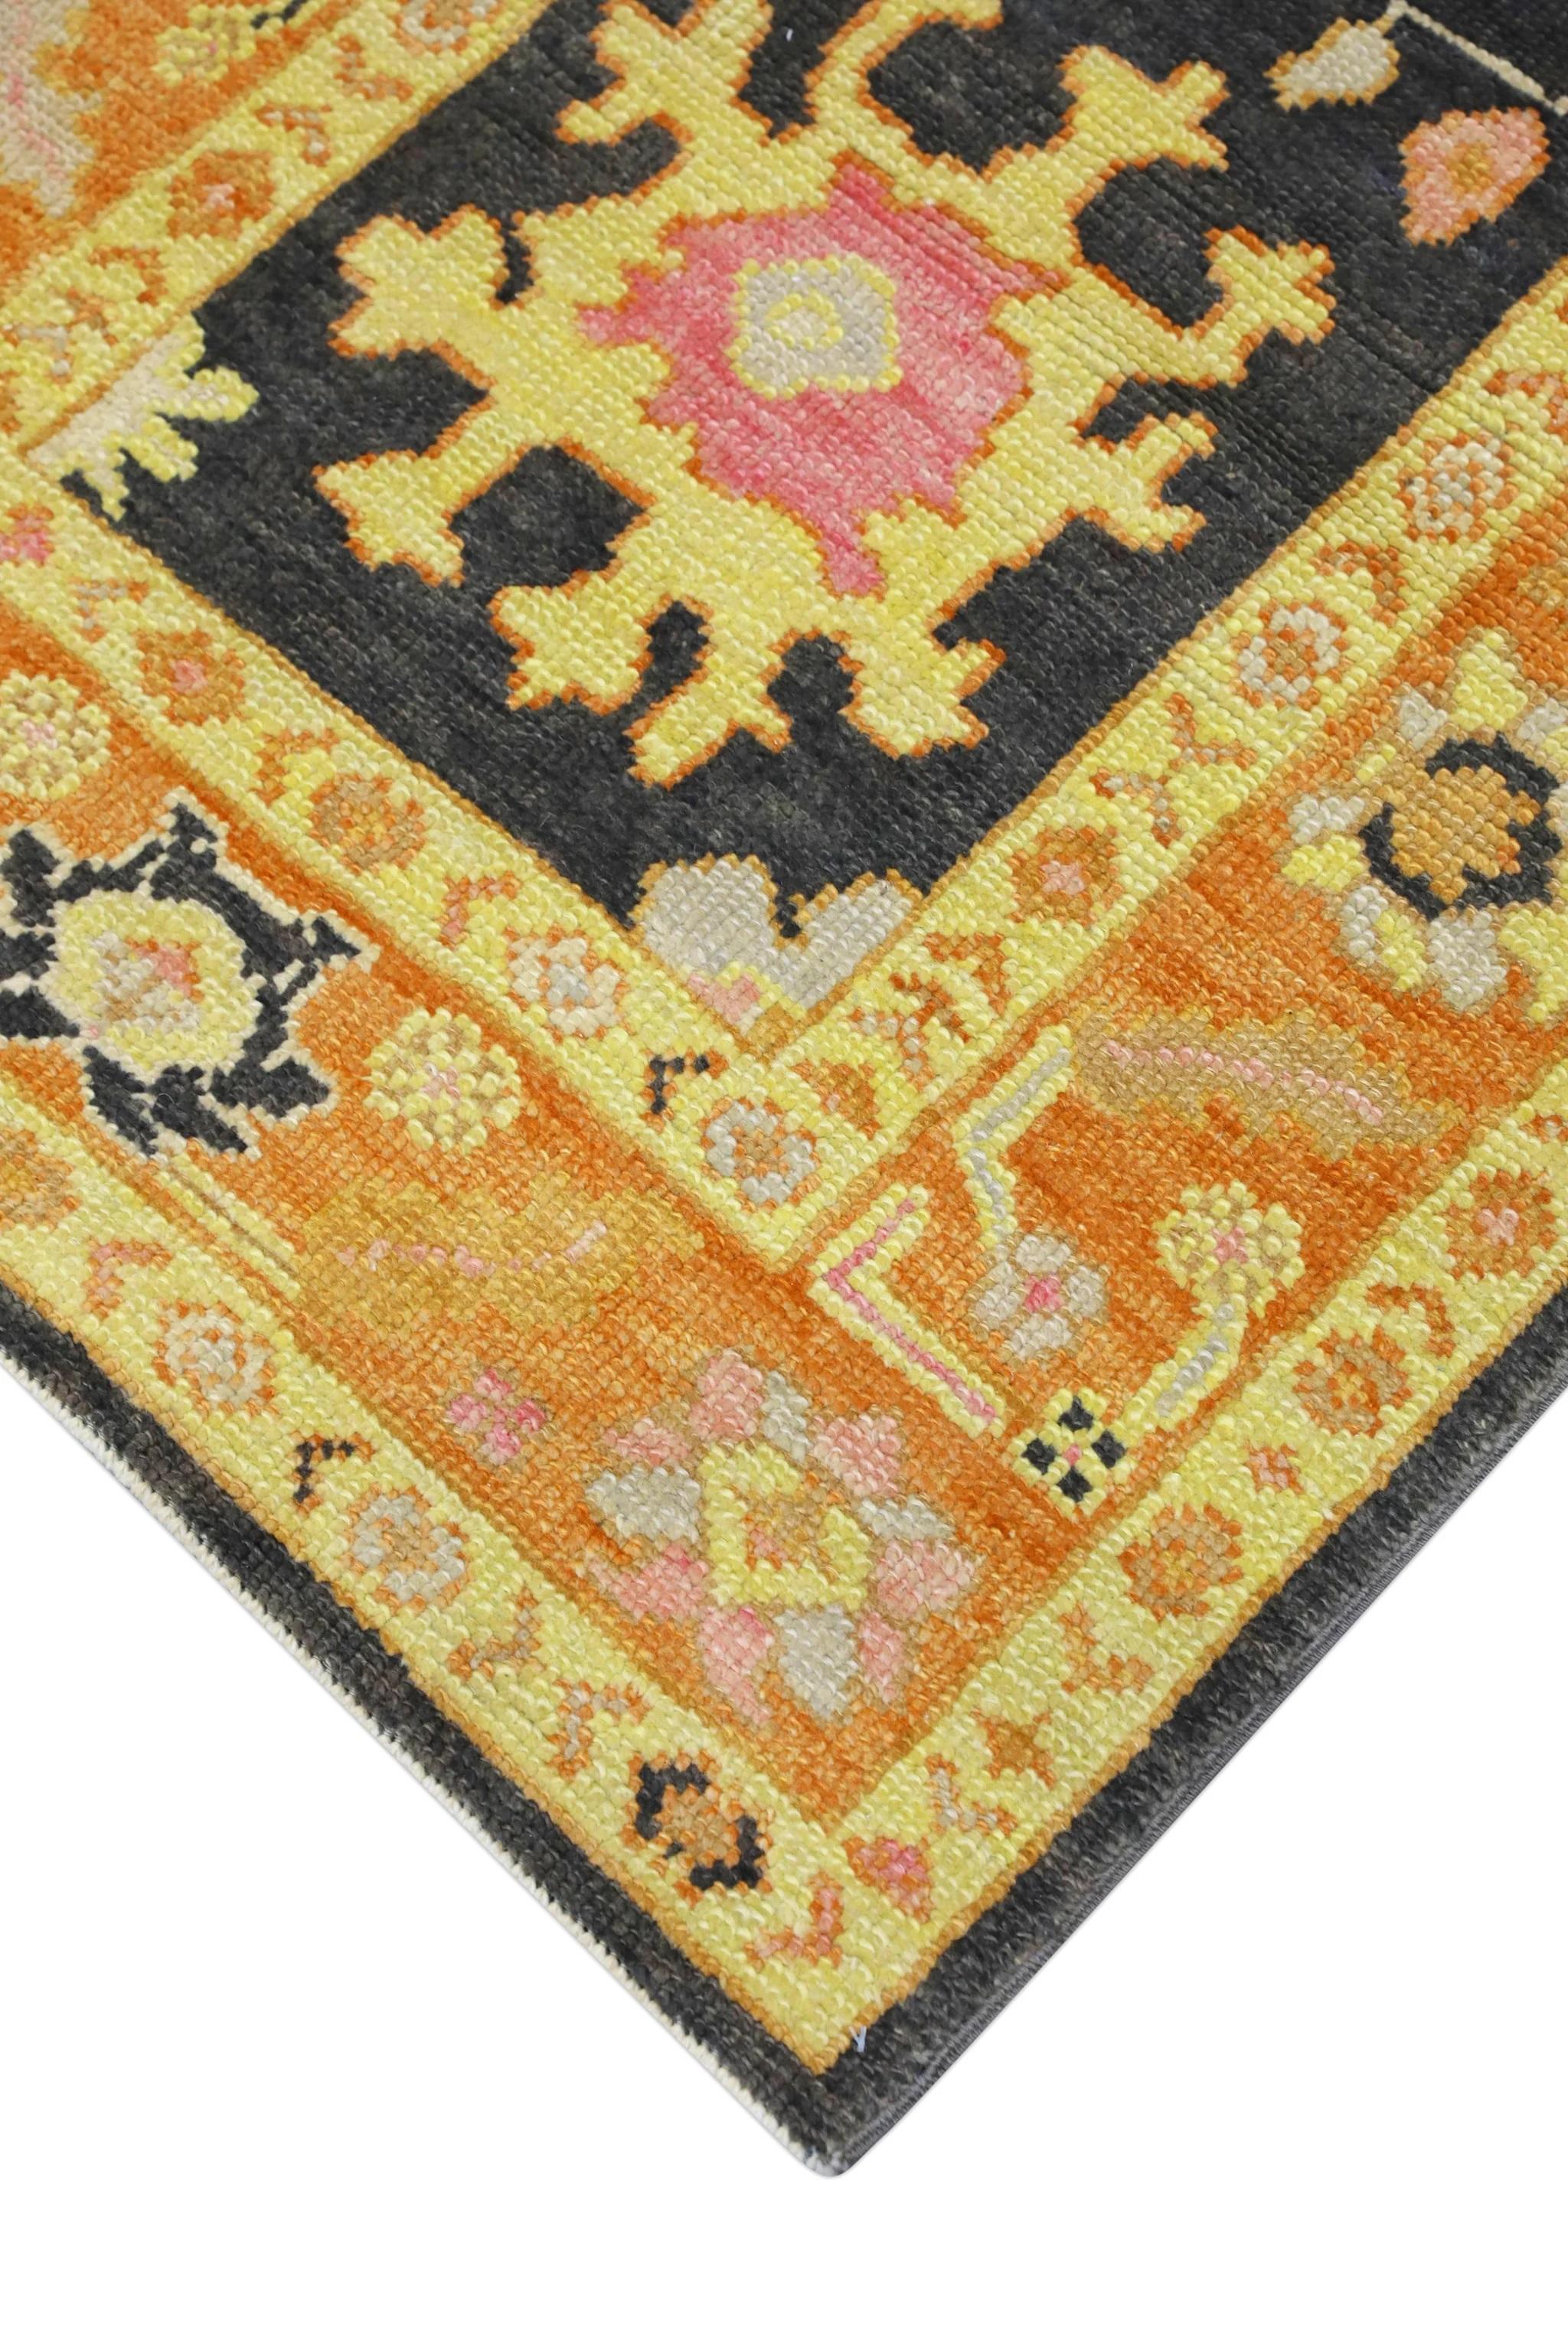 Wool Handwoven Turkish Oushak Rug with Orange and Pink Floral Design 3'1